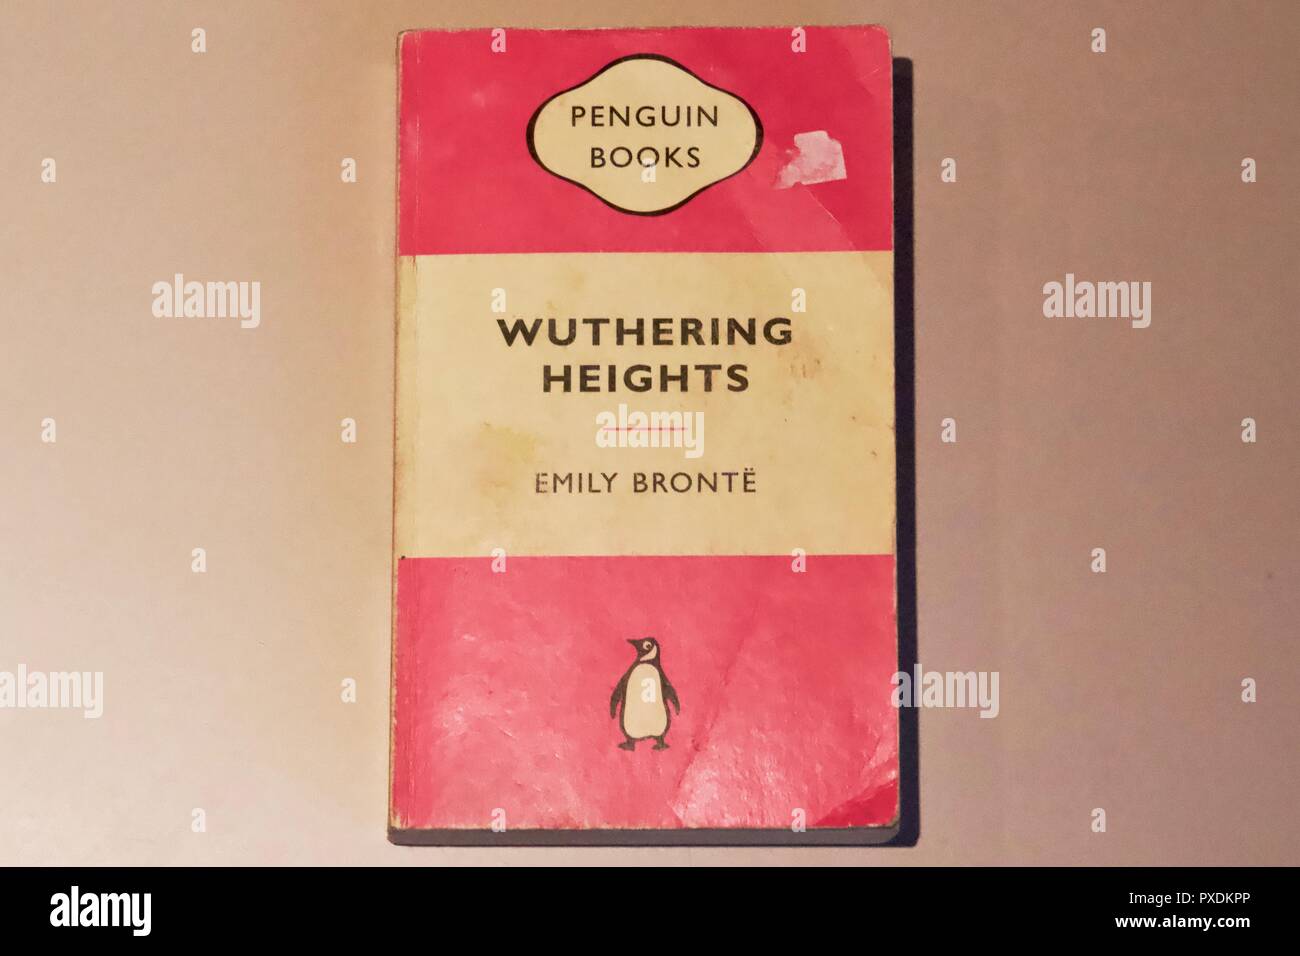 Pink paperback book cover for Wuthering Heights by Emily Bronte, published by Penguin books Stock Photo